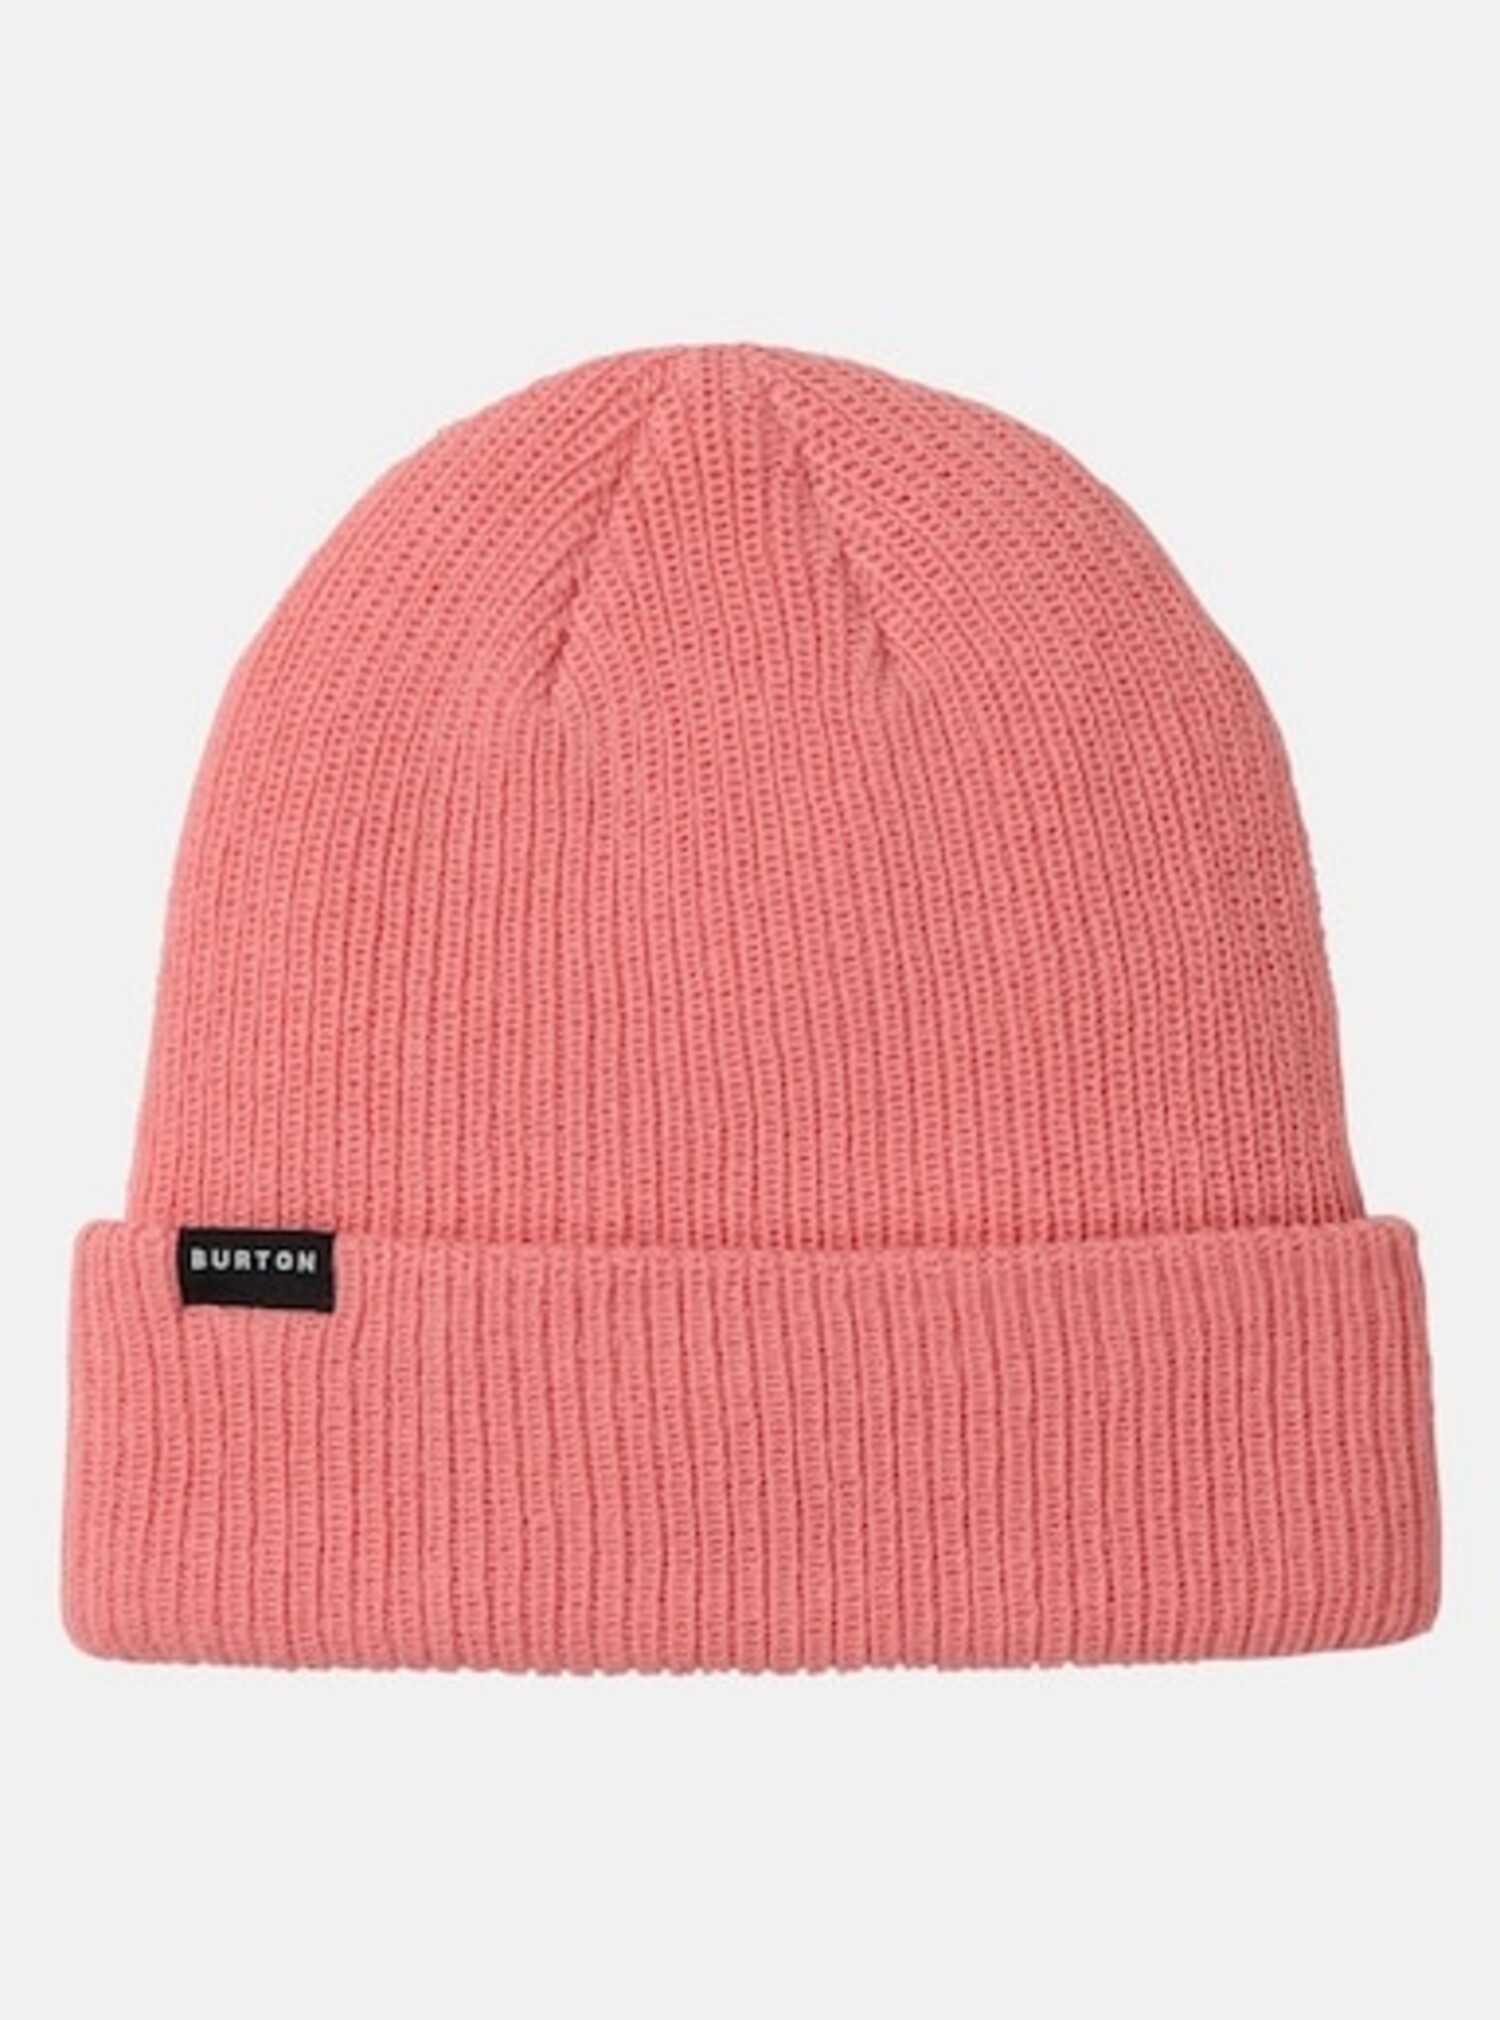 Burton Women's Recycled All Day Beanie - REEF PINK - Yellow Turtle